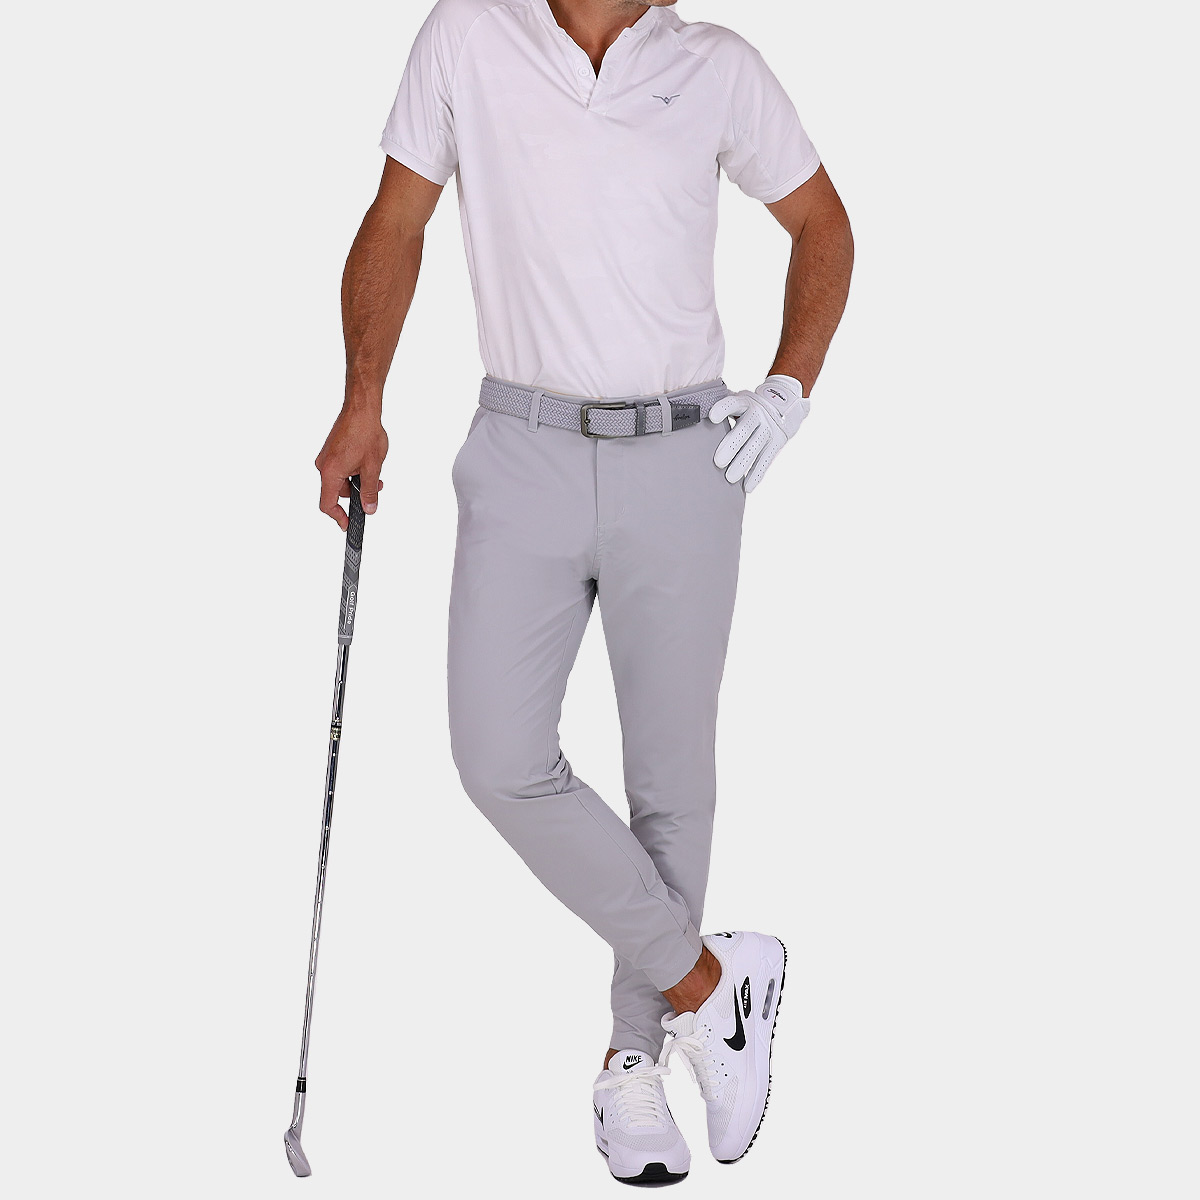 Avalon Golf Joggers Black Friday Sale - Up to 40% off